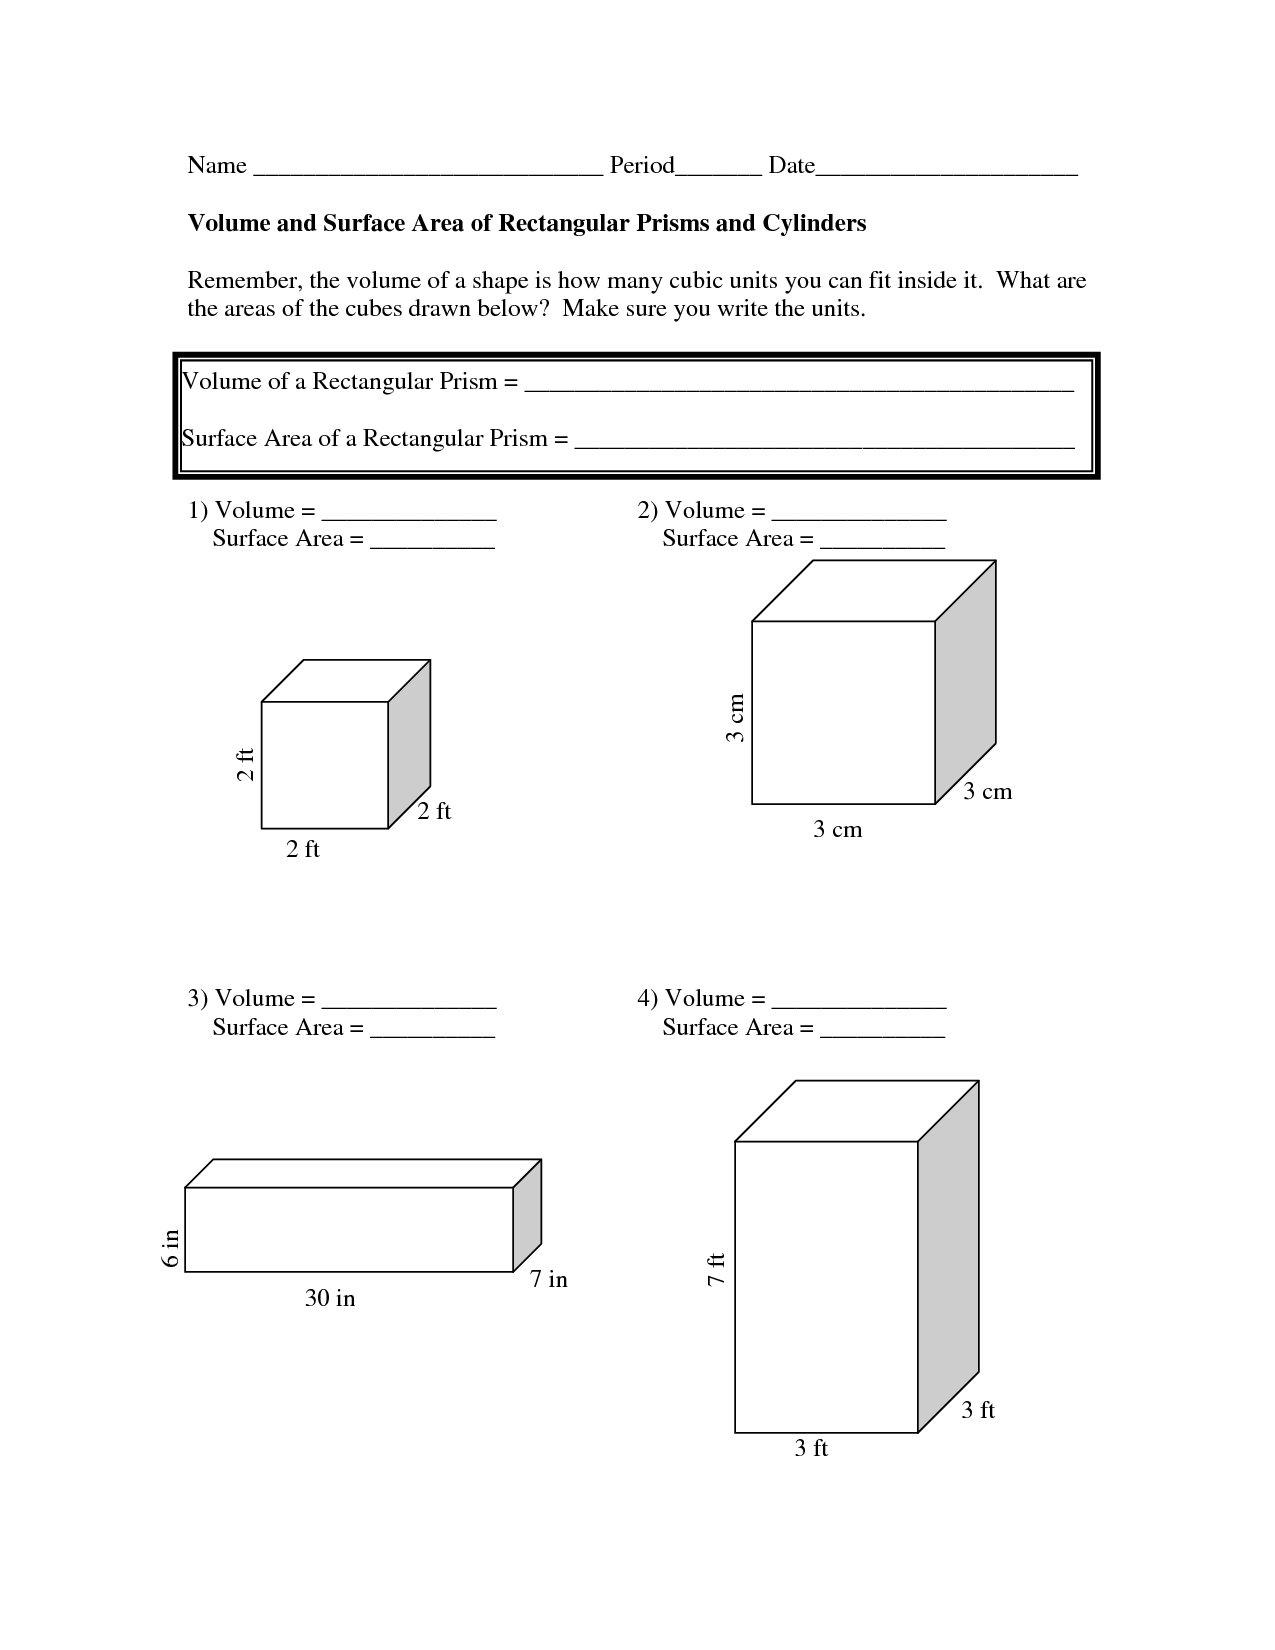 10-best-images-of-triangular-prism-surface-area-worksheet-triangular-prism-volume-worksheet